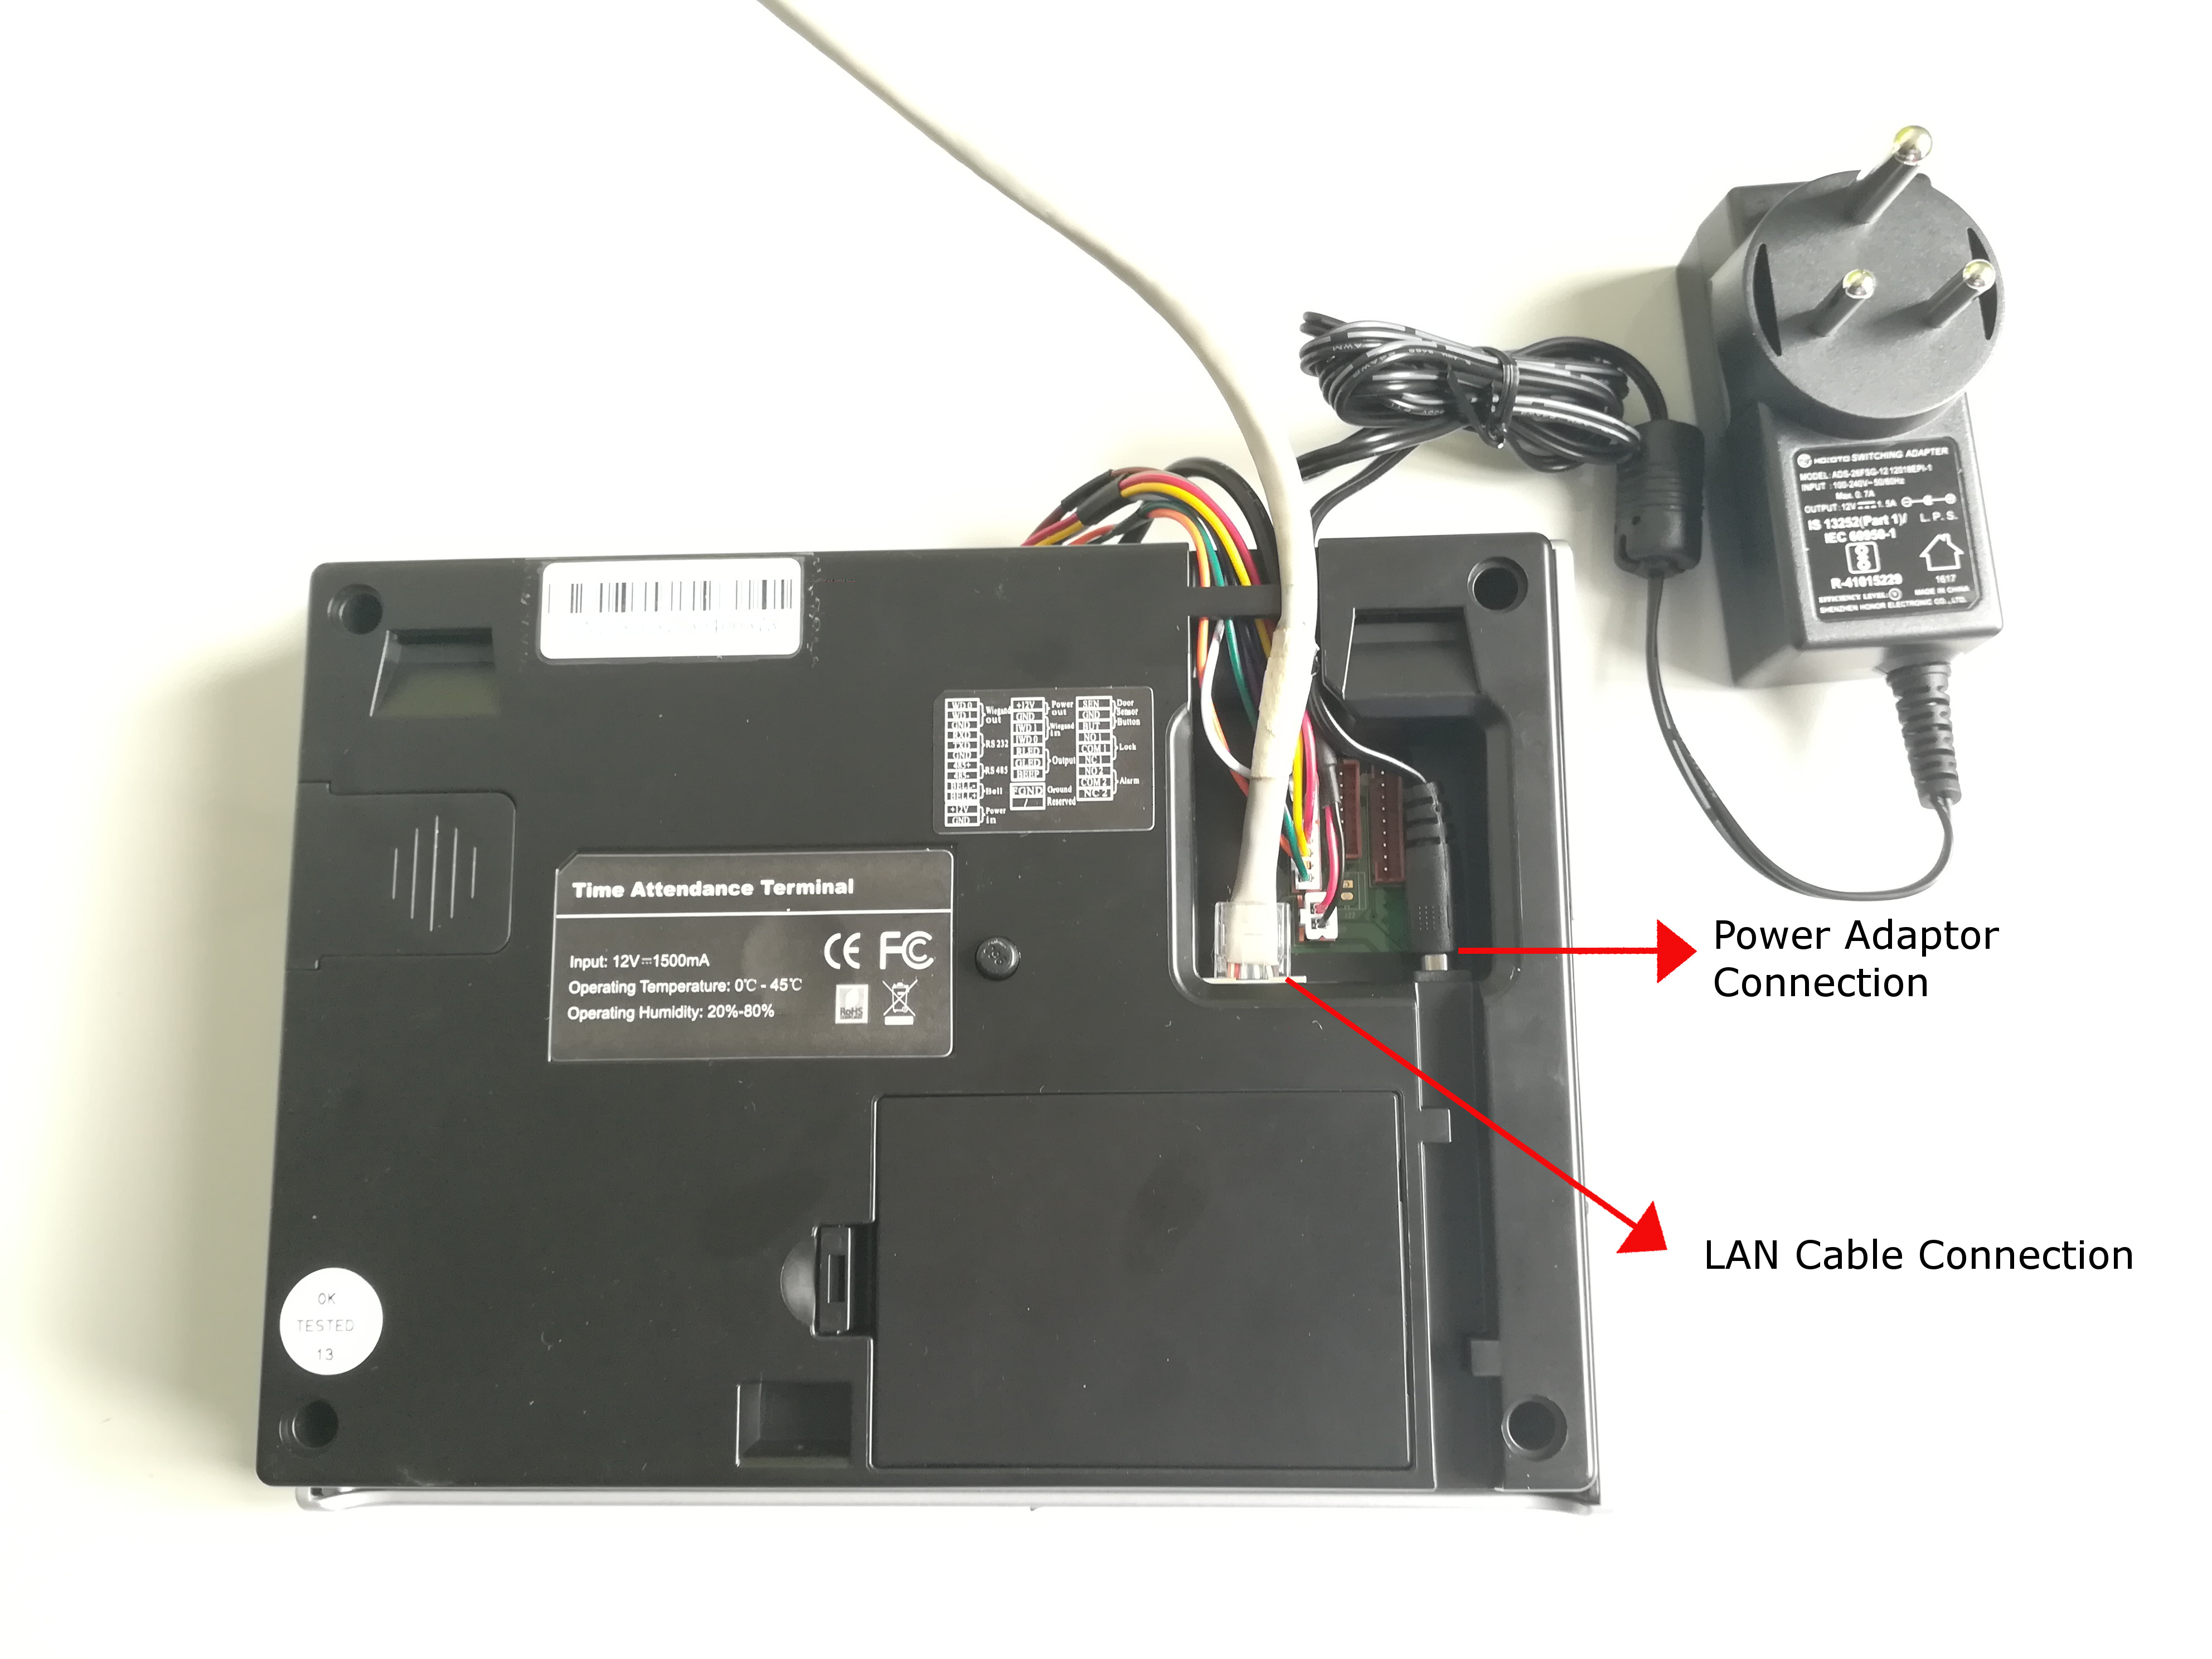 LAN and Power Adaptor to X990 and F12 - Biometric Device